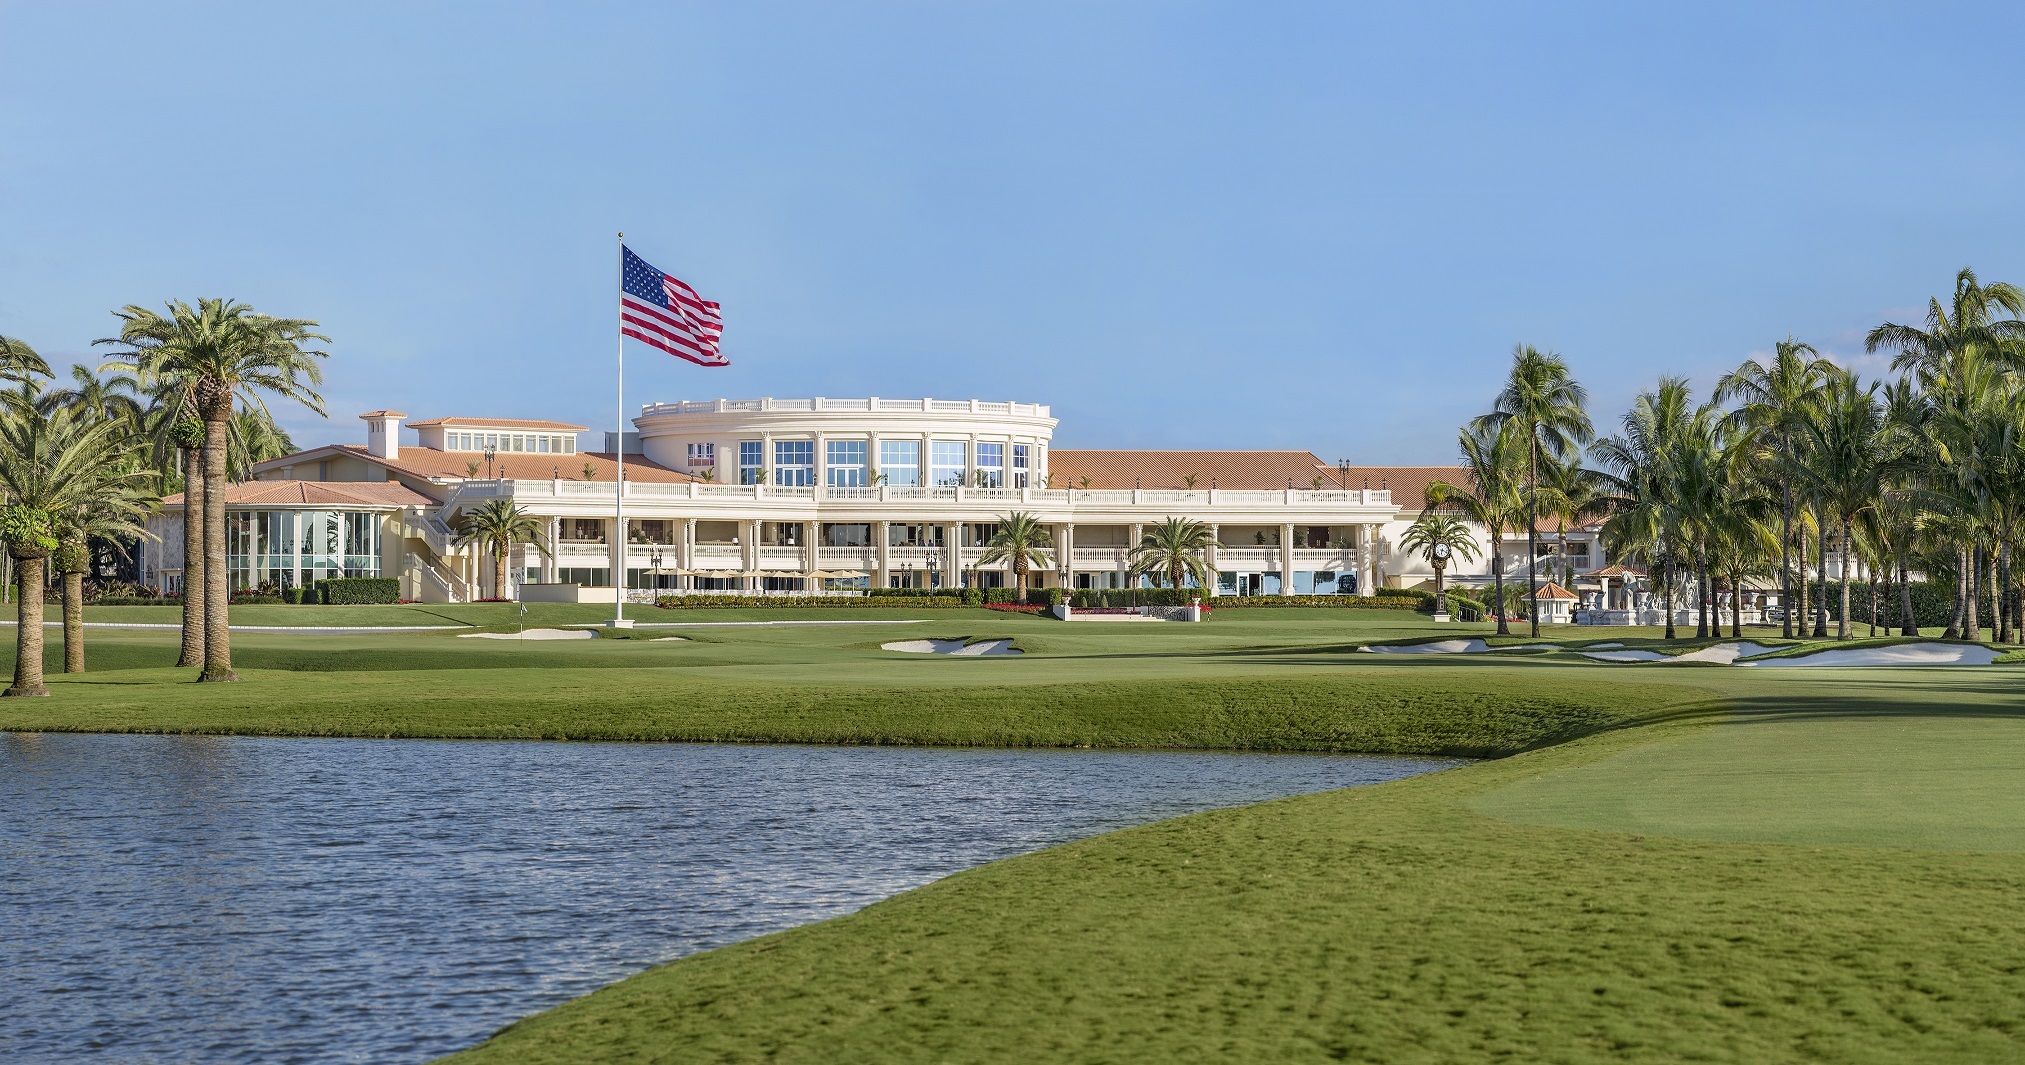 Golf Vacation Package - Great Deal at Doral: Blue Monster Stay & Play + FREE REPLAYS from $367 per day!